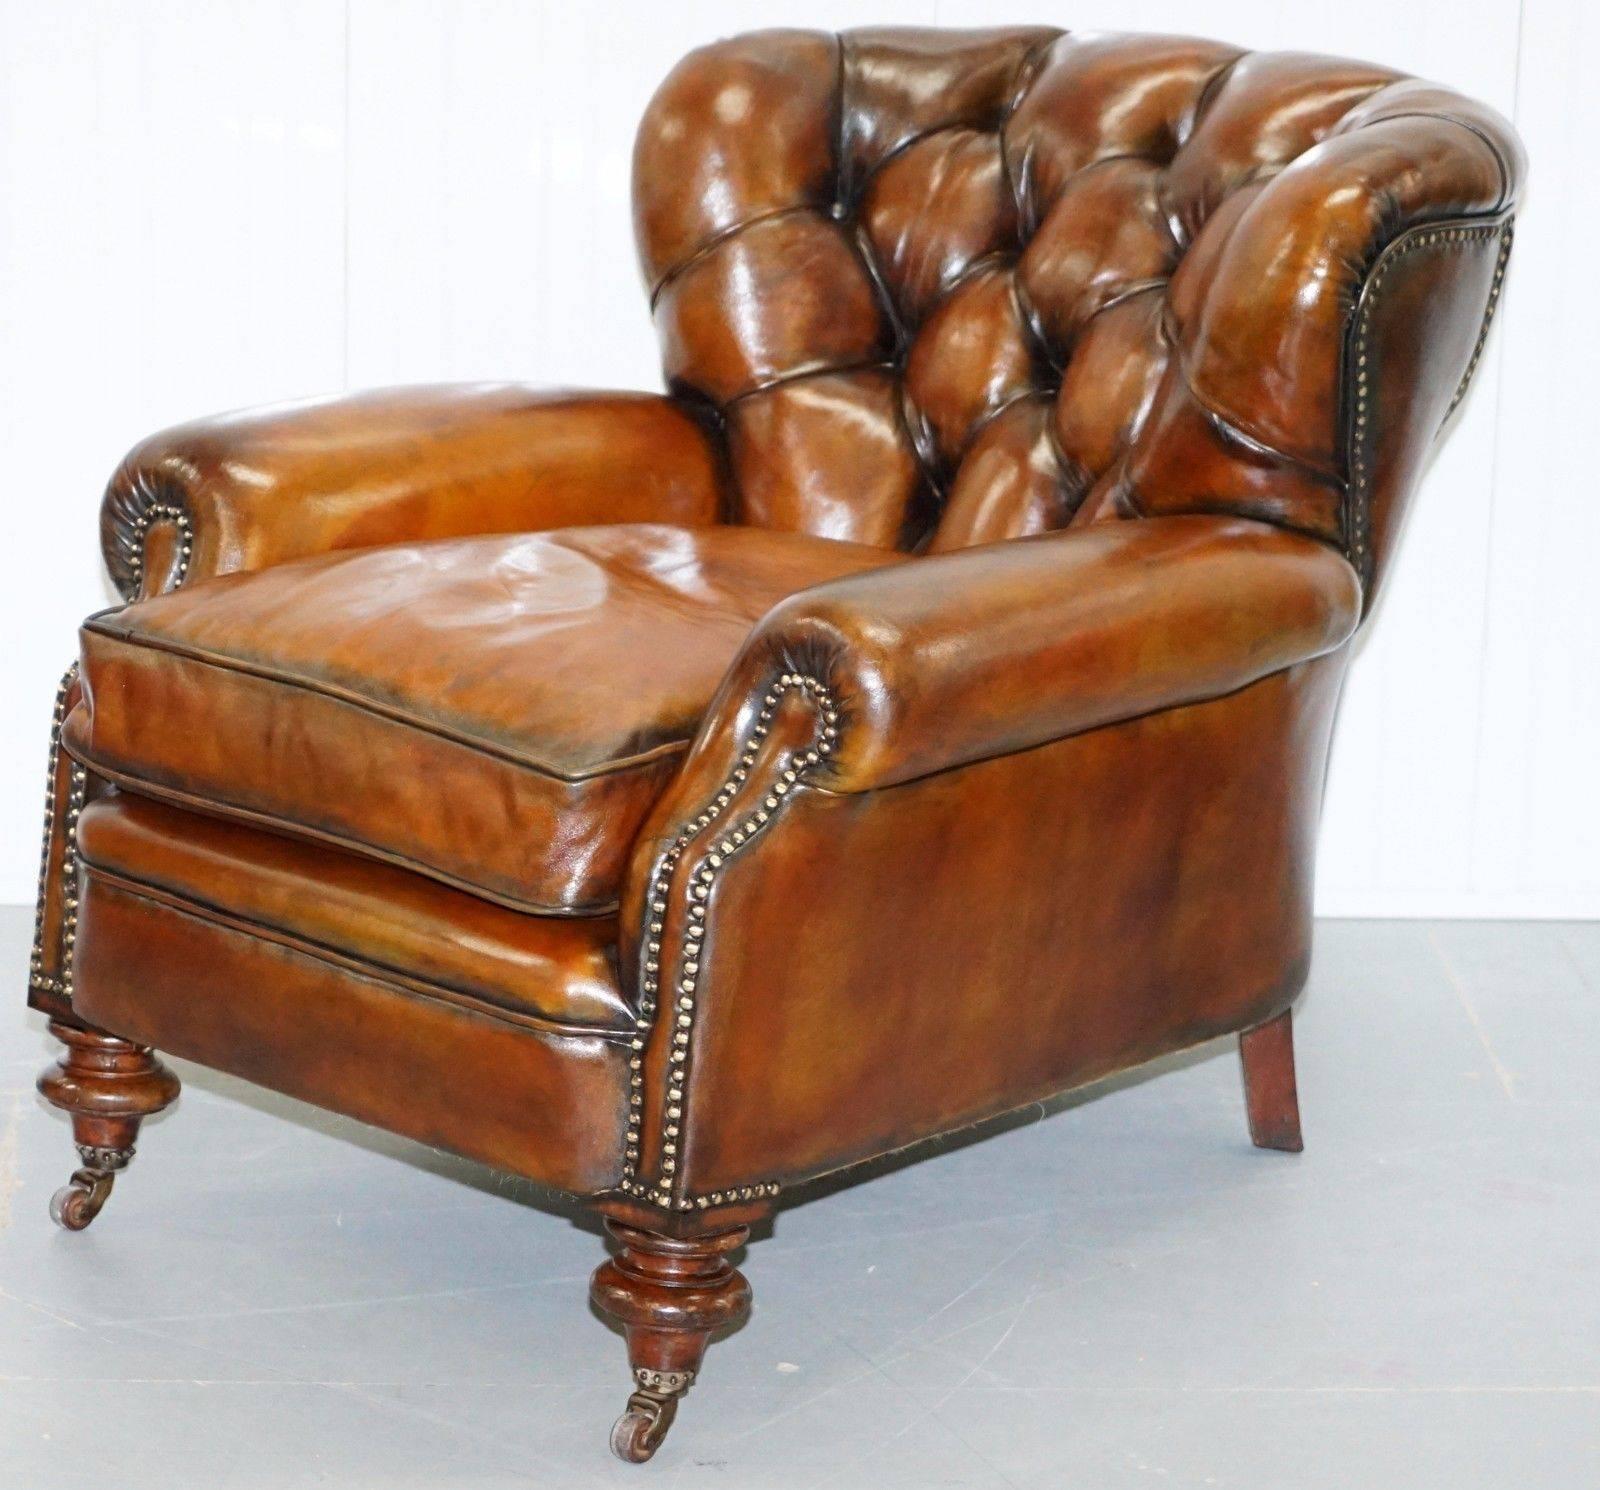 We are delighted to offer for sale this very rare fully restored Victorian armchair

This armchair has been fully restored with no expense spared, the history of the chair is as follows. It arrived in my warehouse earlier this year and was without